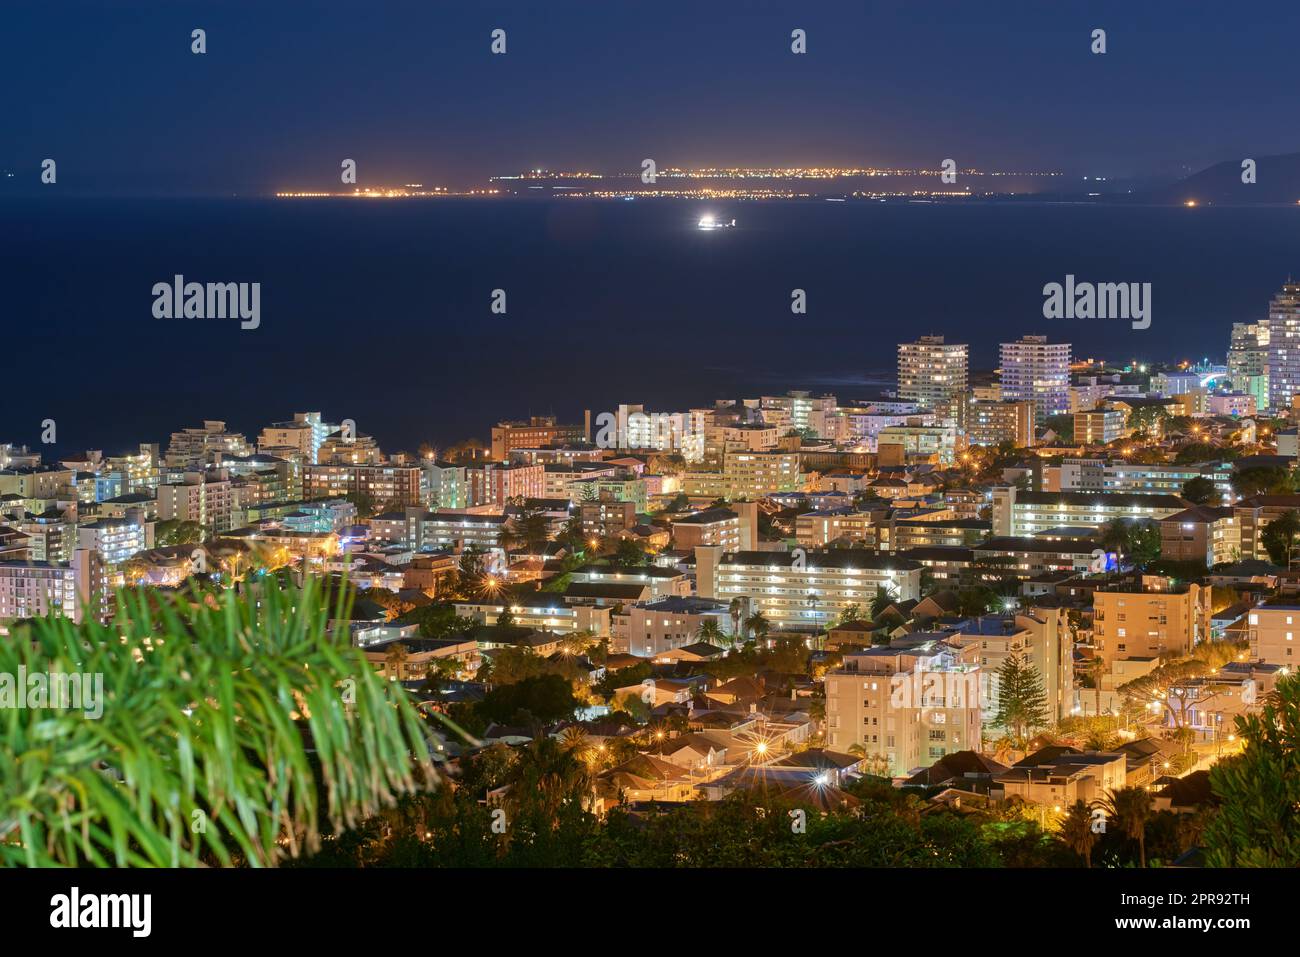 Urban city lights against a midnight sky with copy space. Skyline with colorful lighting and the open ocean on the horizon. Modern architectural buildings, vacation hotels in an urban city Stock Photo